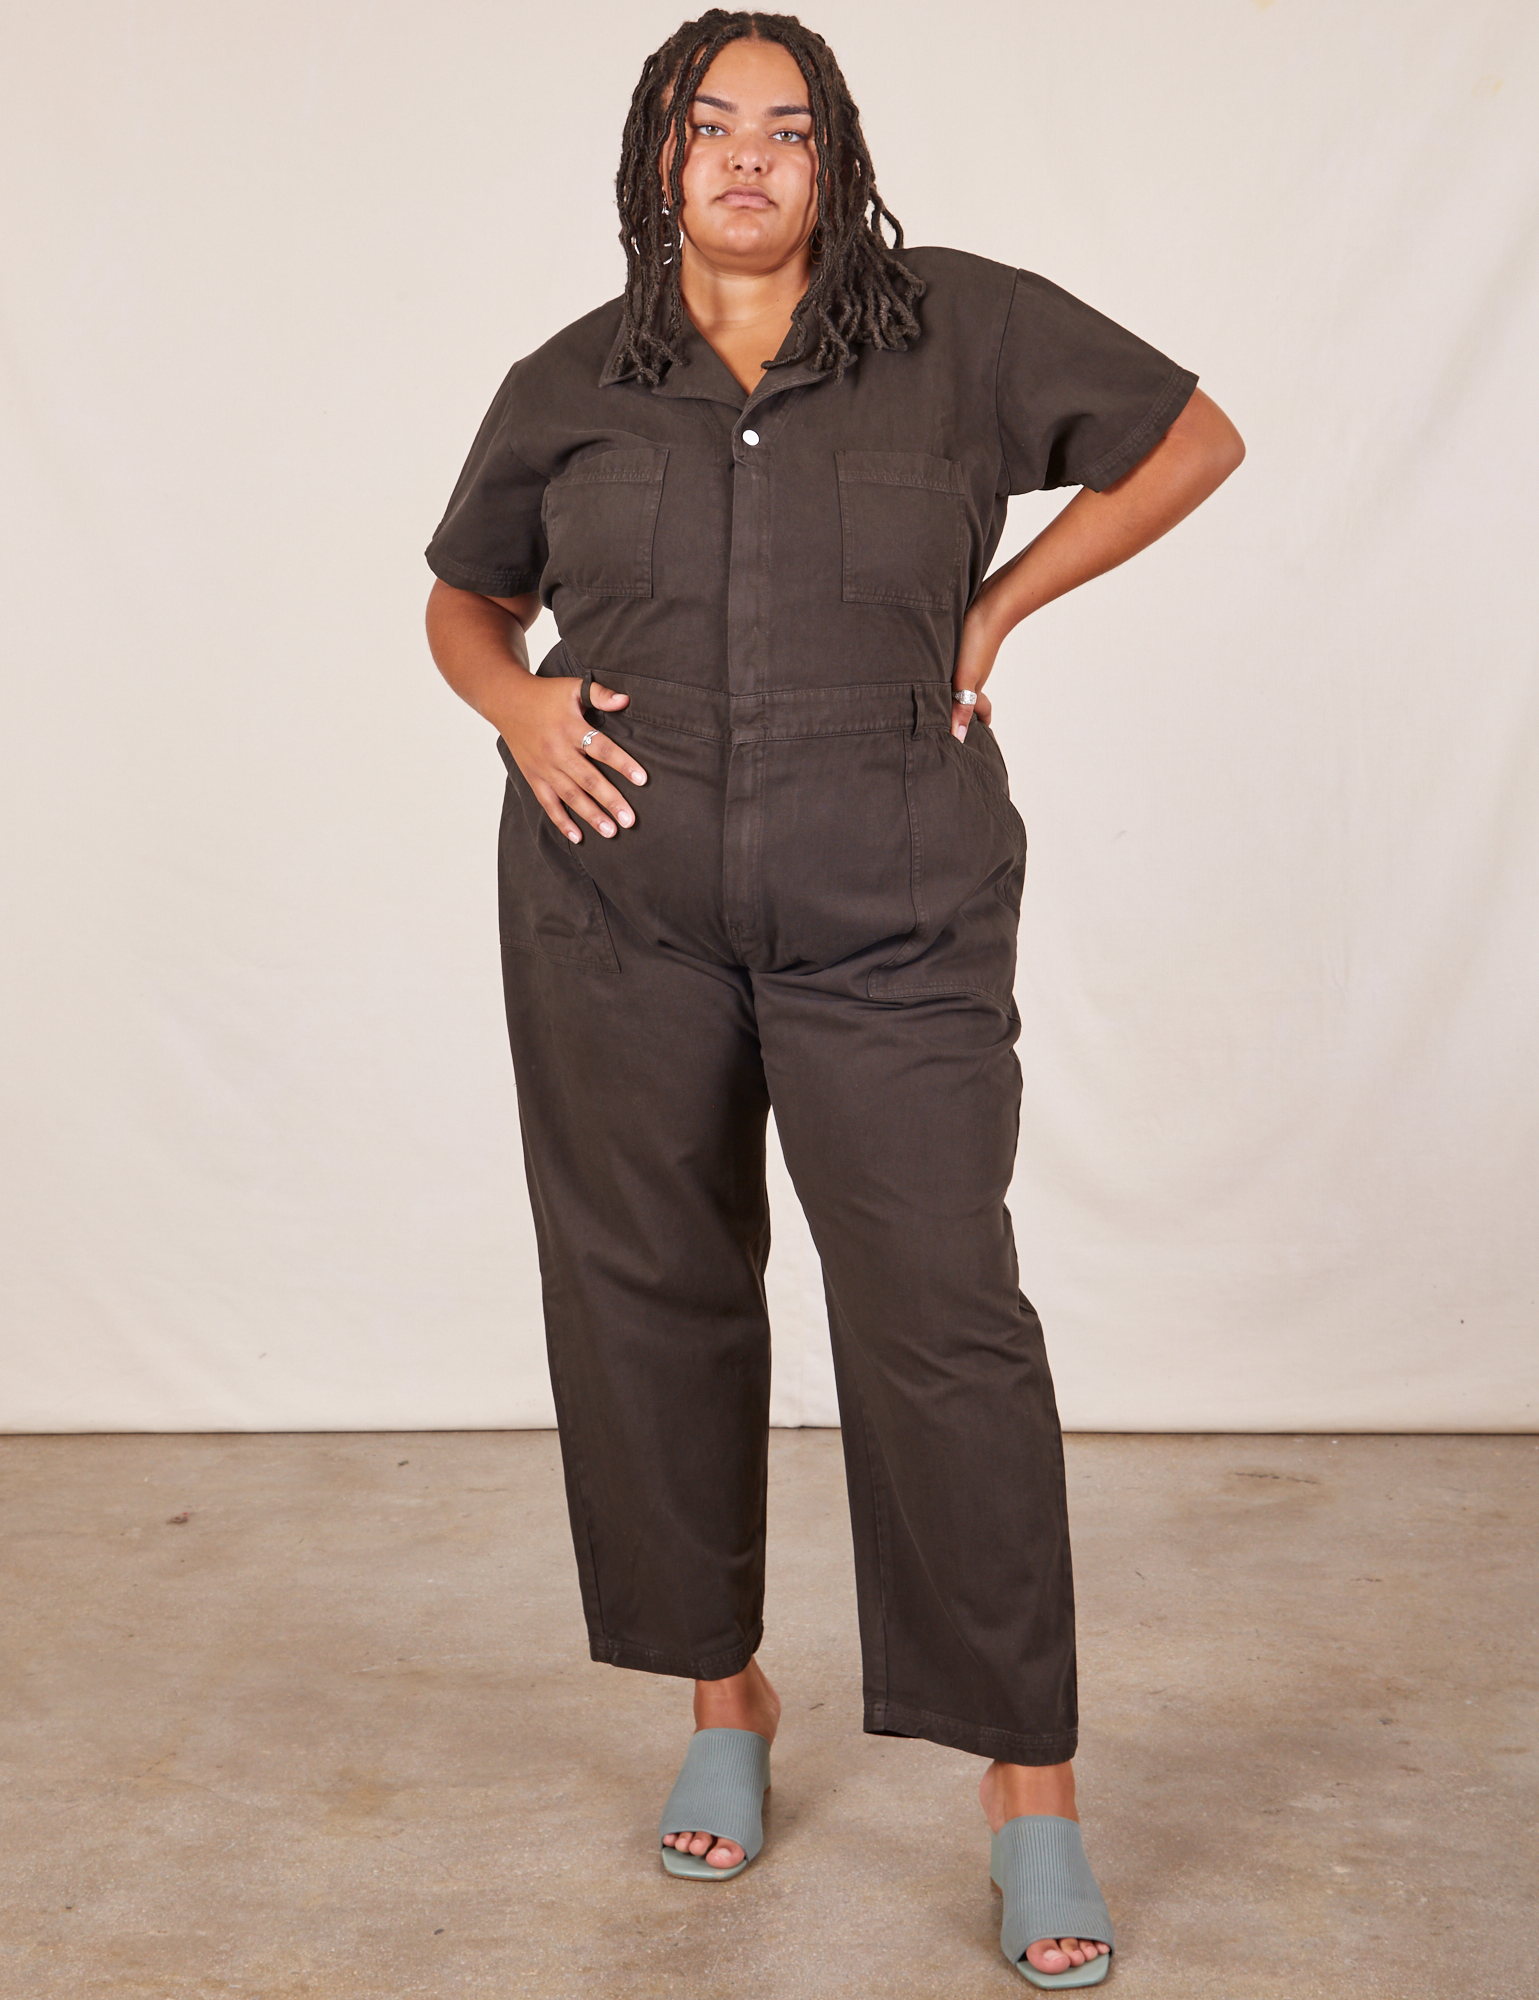 Alicia is 5’9” and wearing 2XL Short Sleeve Jumpsuit in Espresso Brown 